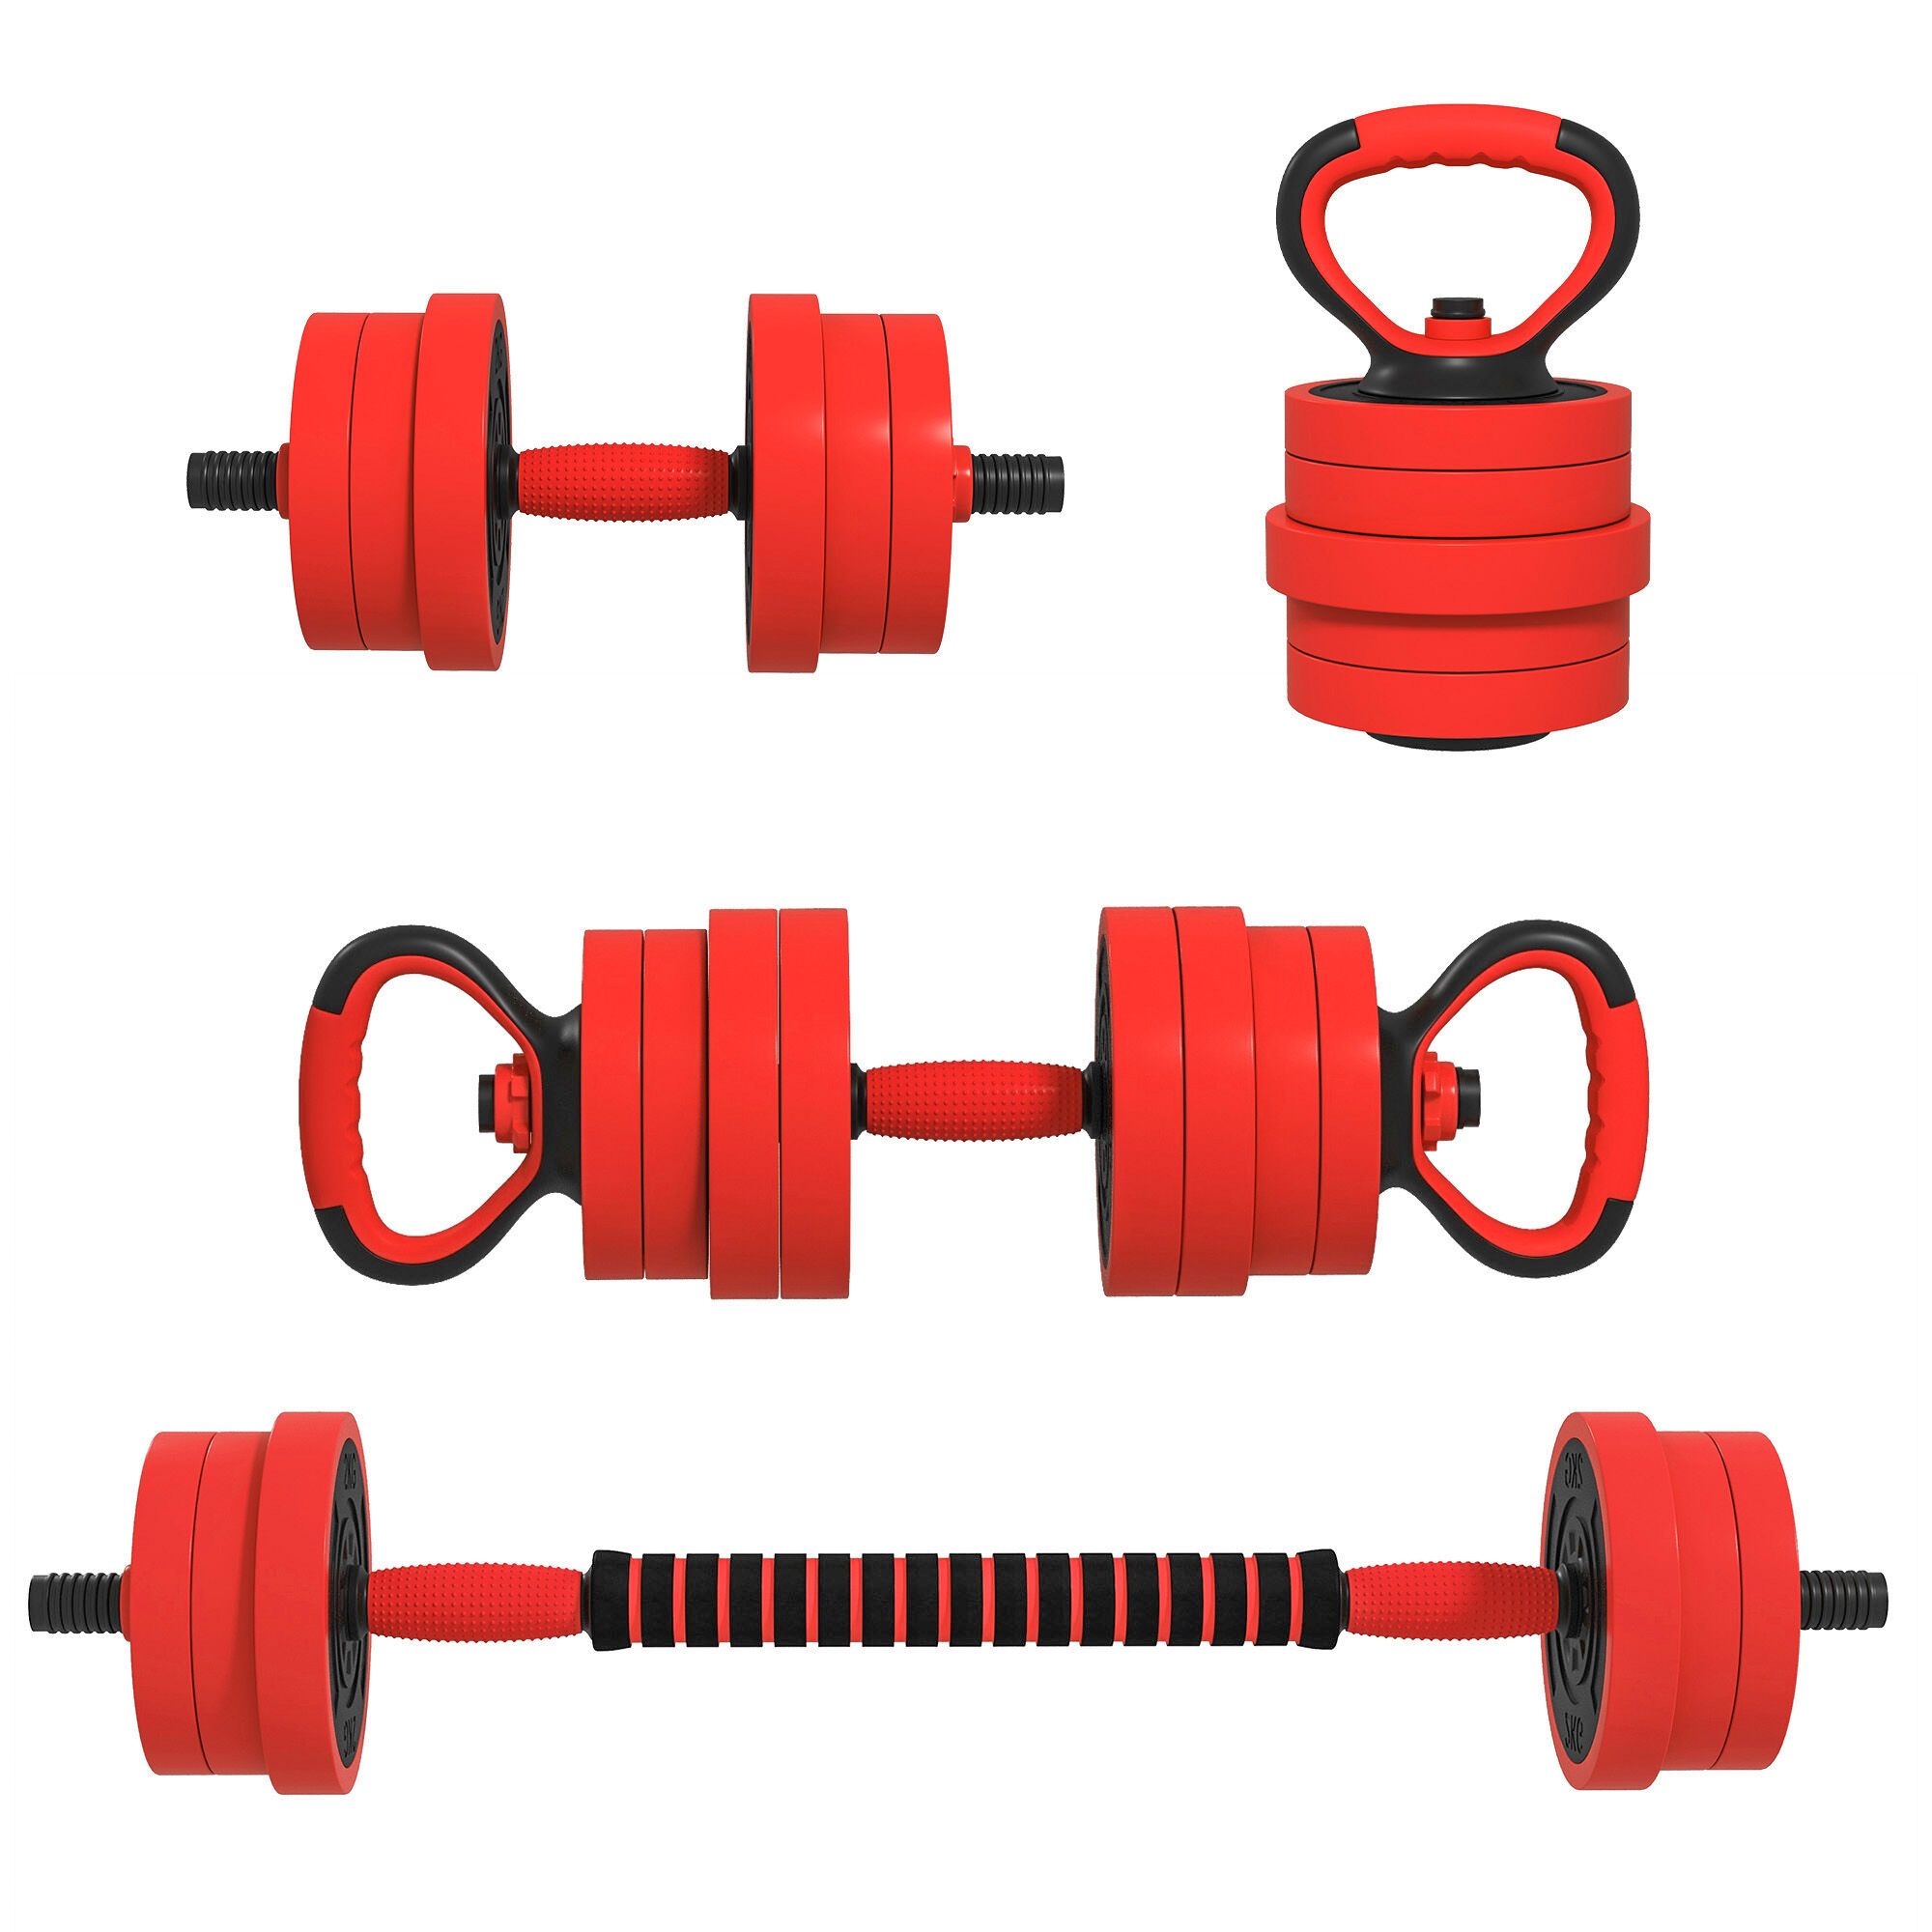 Soozier 4-in-1 Adjustable Dumbbell Set 66lbs for Home Gym Comprehensive Weight Training Equipment   Aosom.com